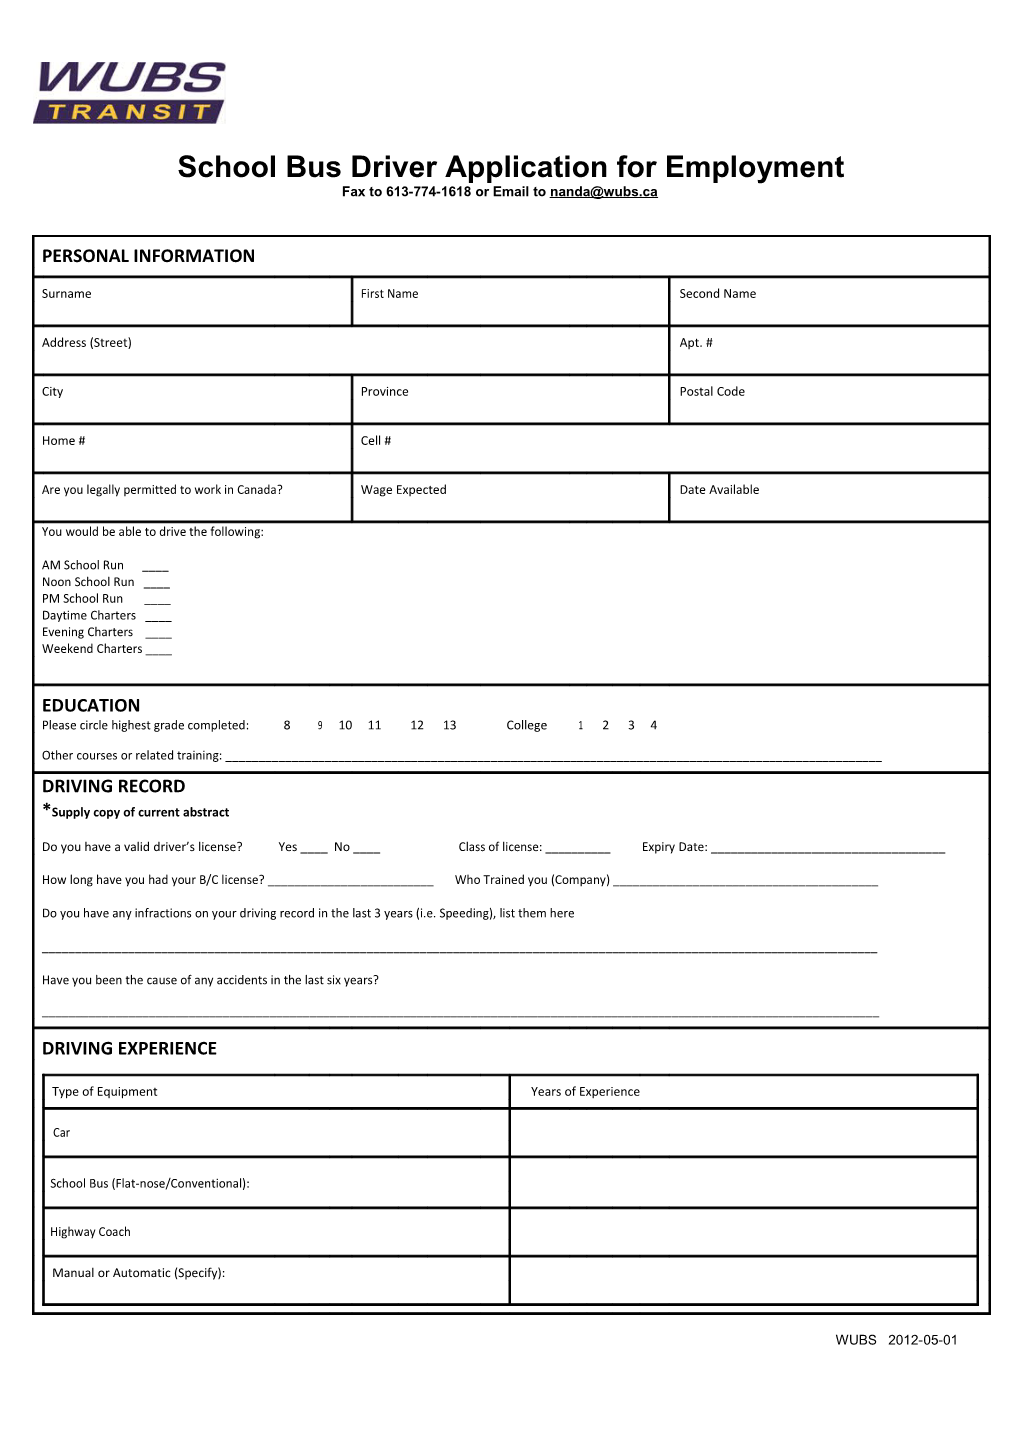 School Bus Driver Application for Employment